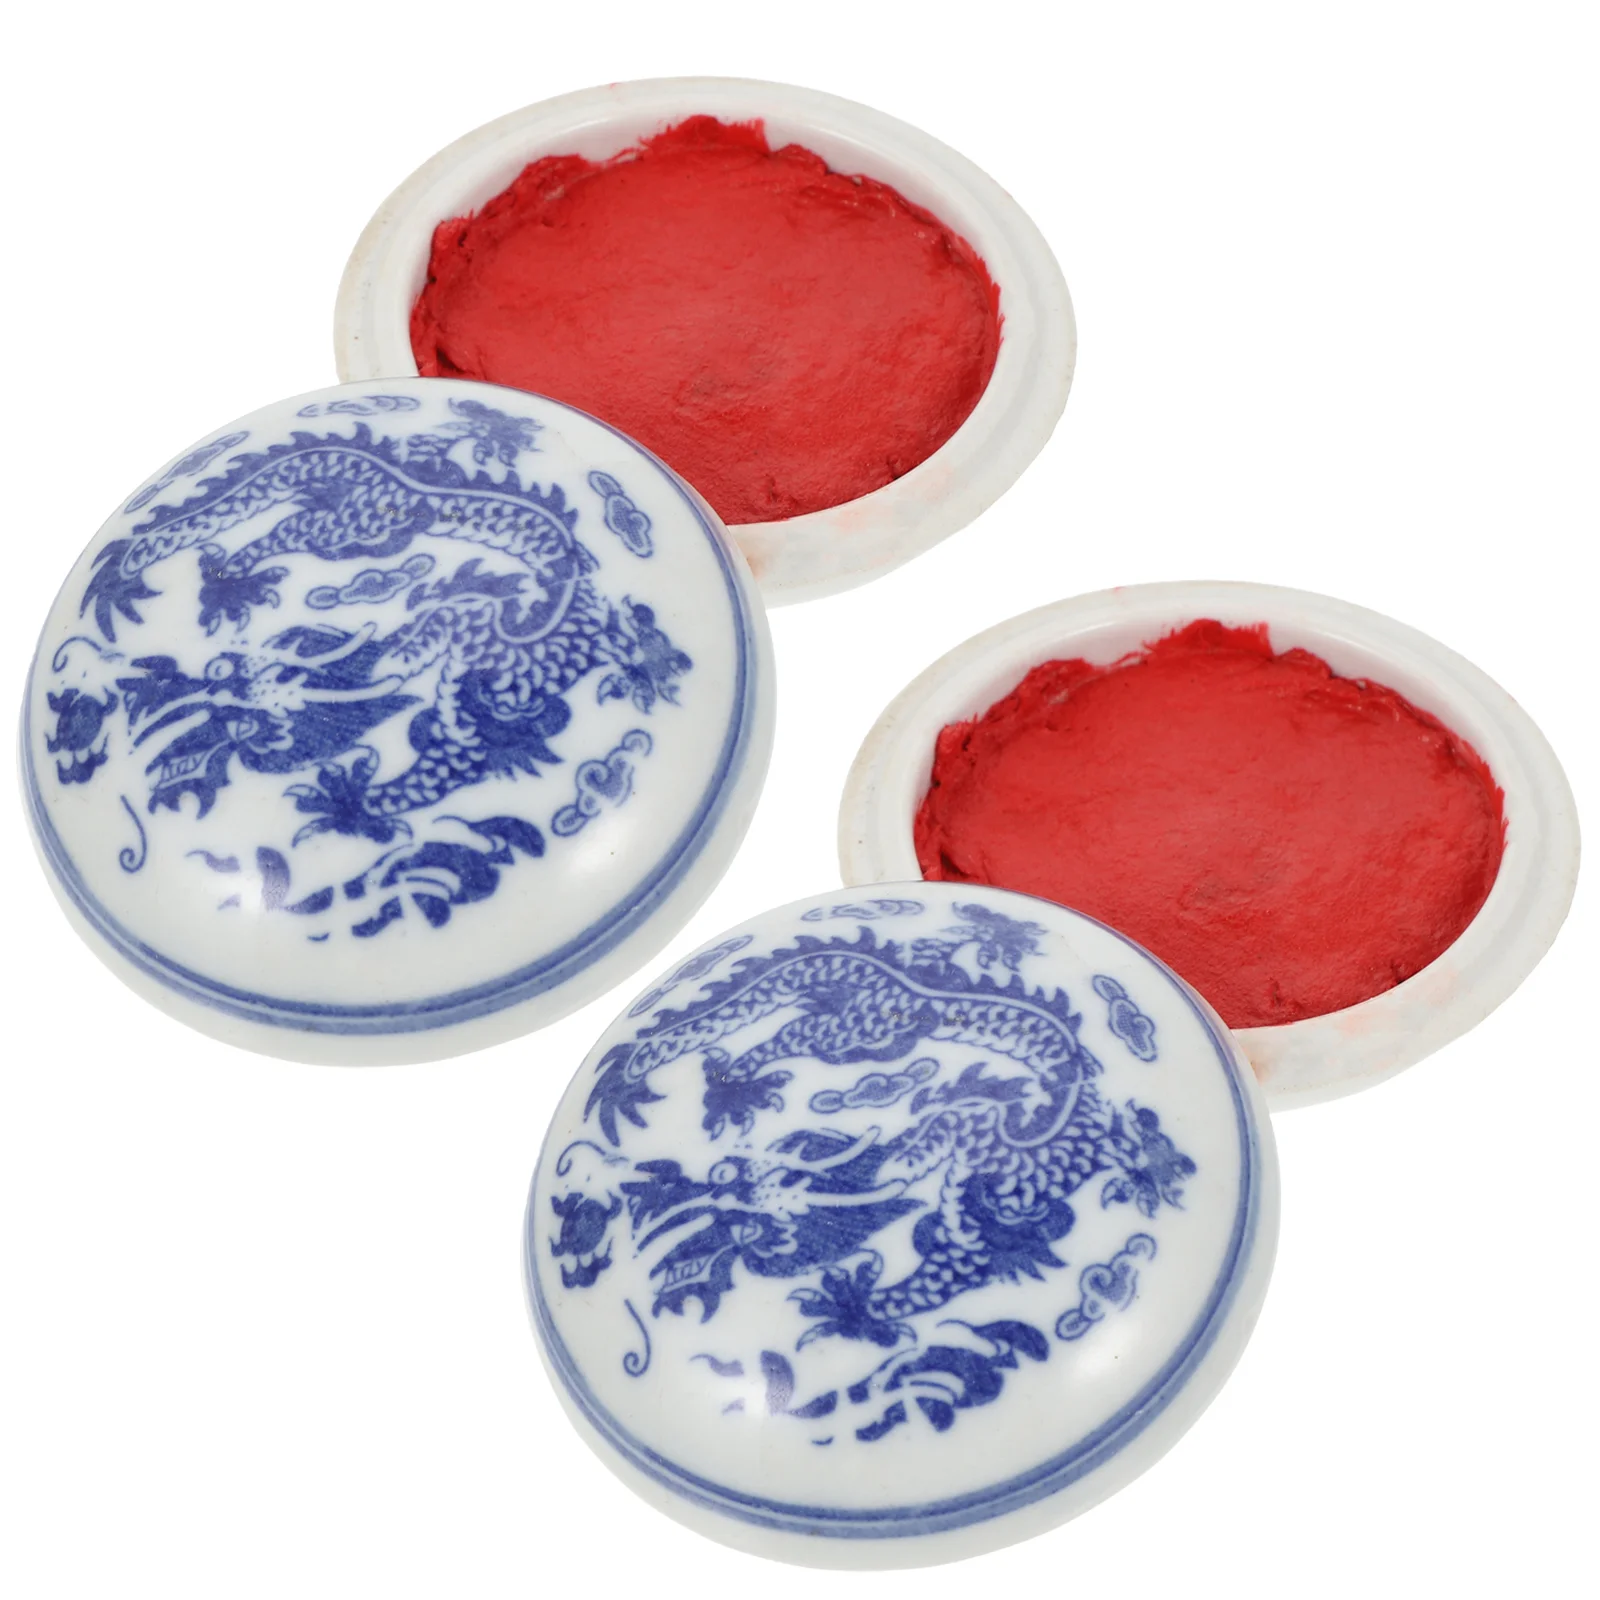 

Ink Pad Calligraphy Red Chinese Stamp Pads Inkpad Seal Paste Drawing Painting Supplies Stamps Washable Kids Craft Ceramic Pastes